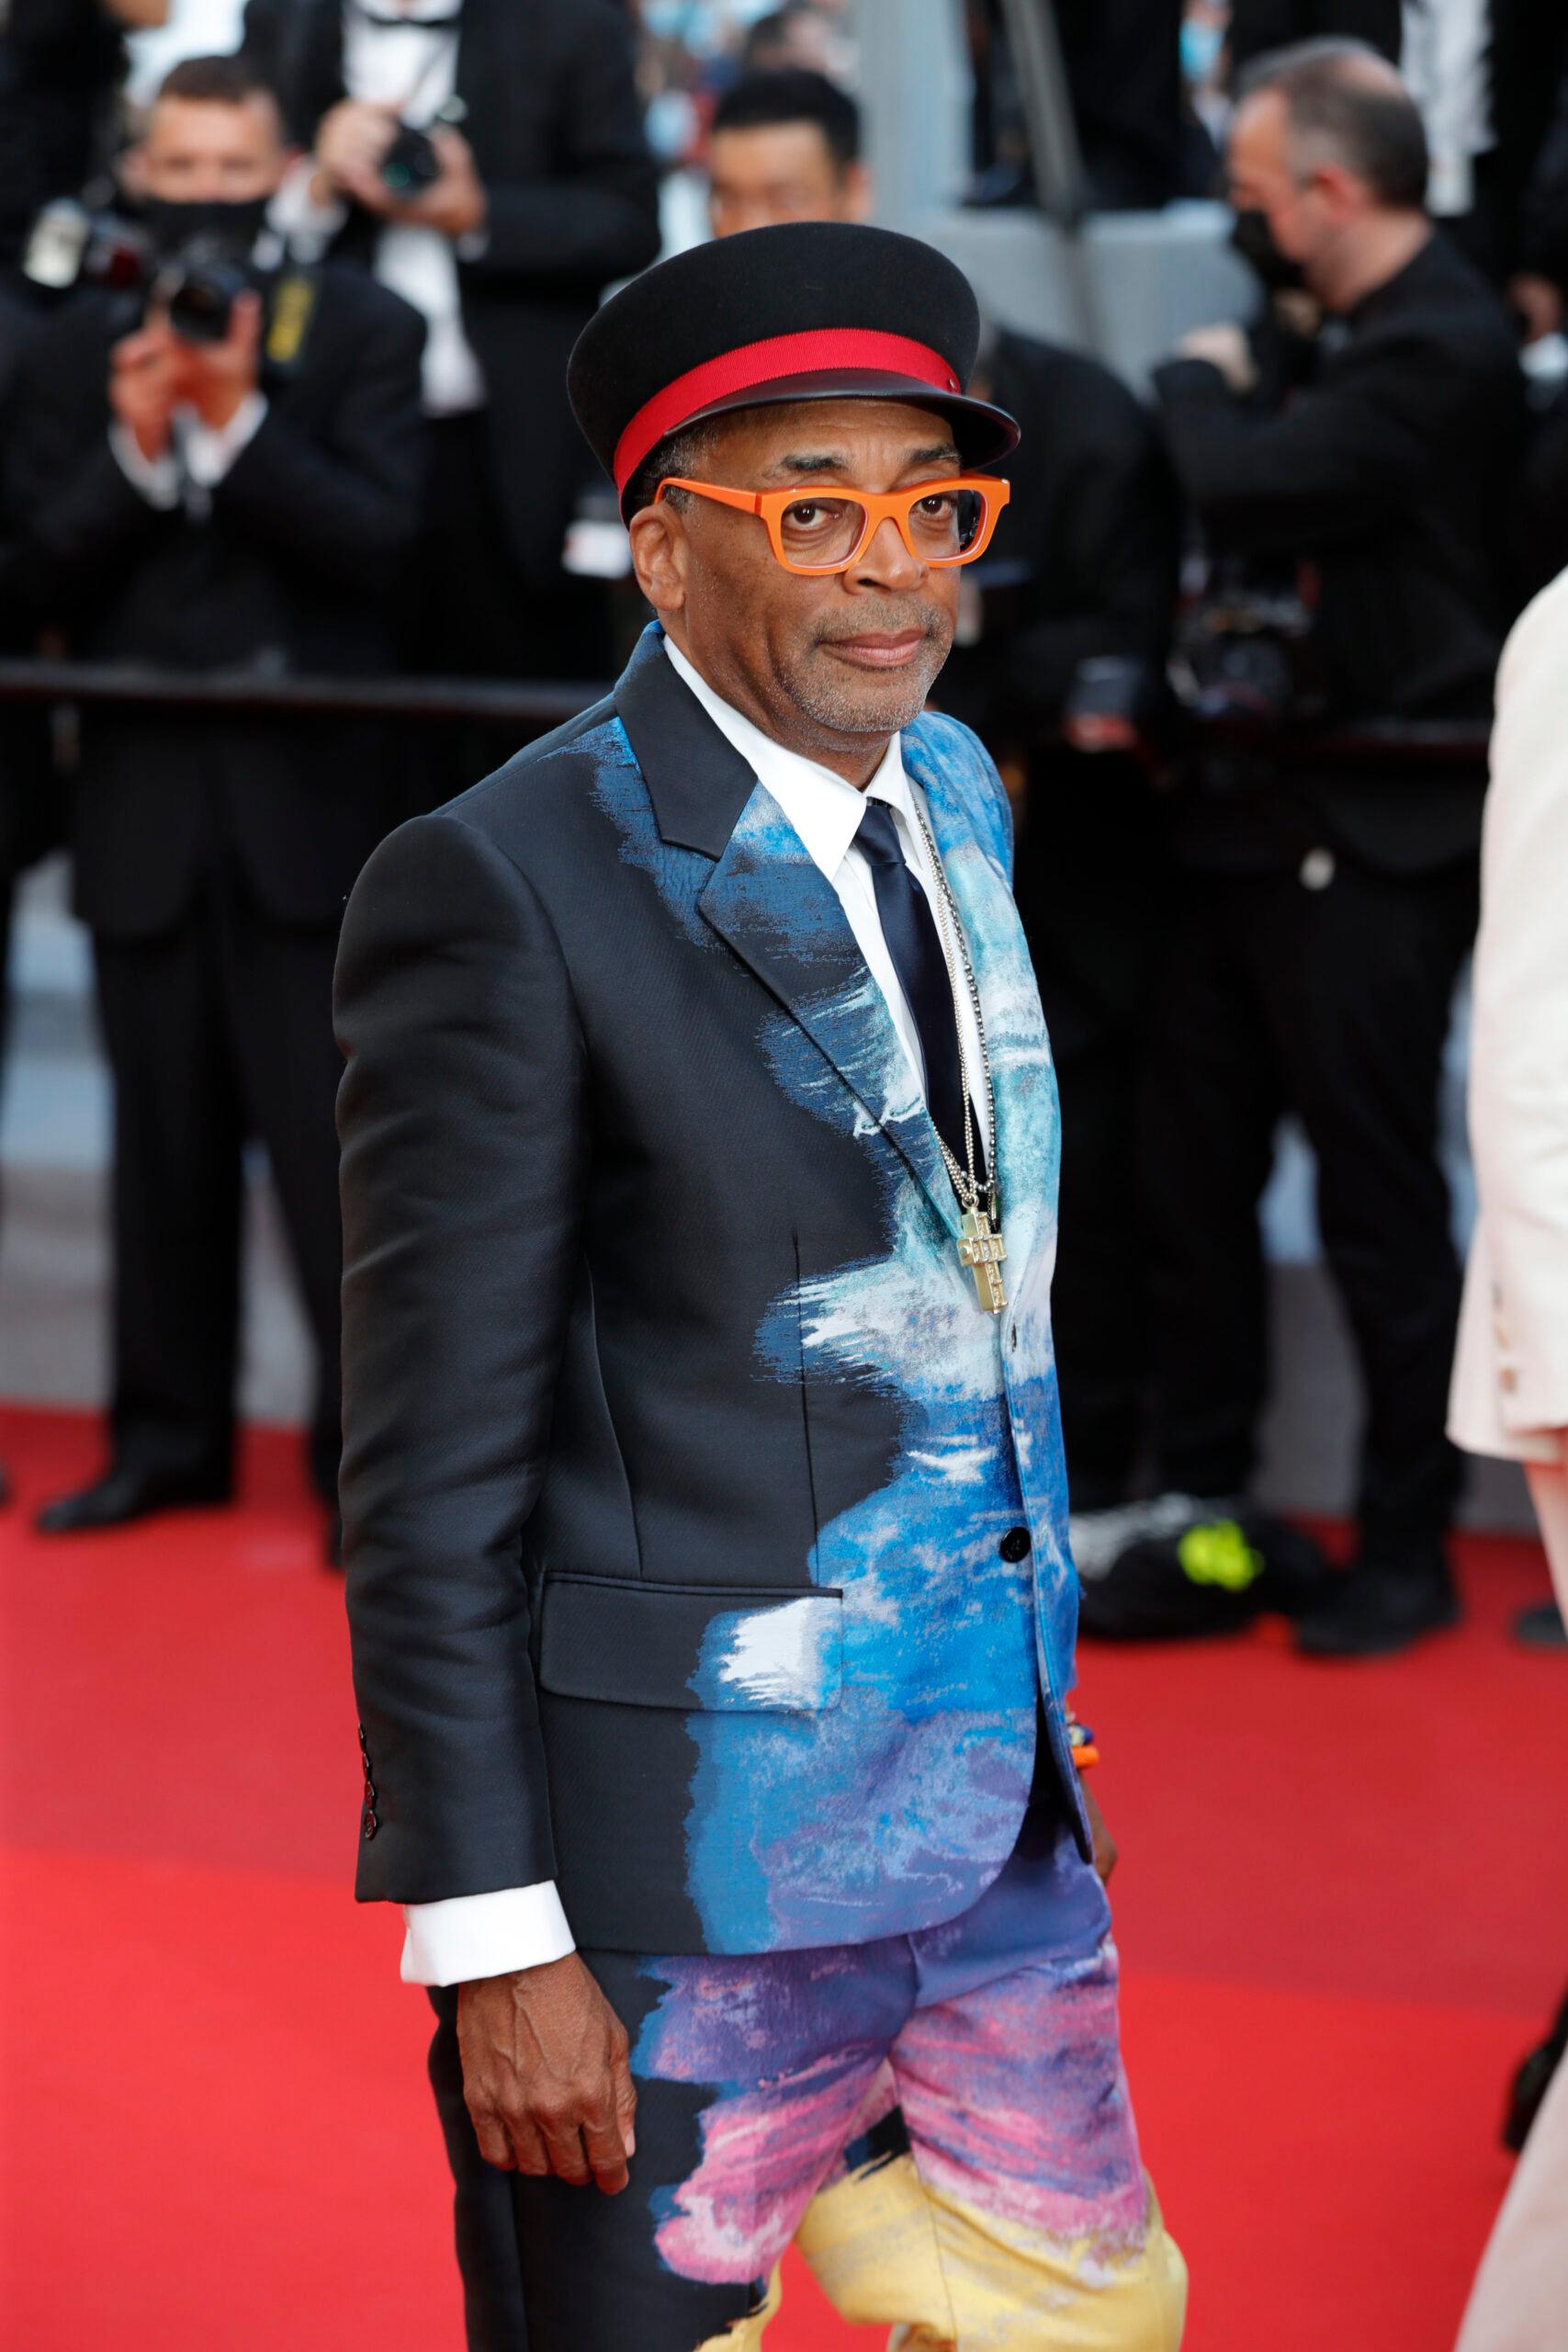 A photo showing Spike Lee at a red-carpet event, sporting a dark blue suit.